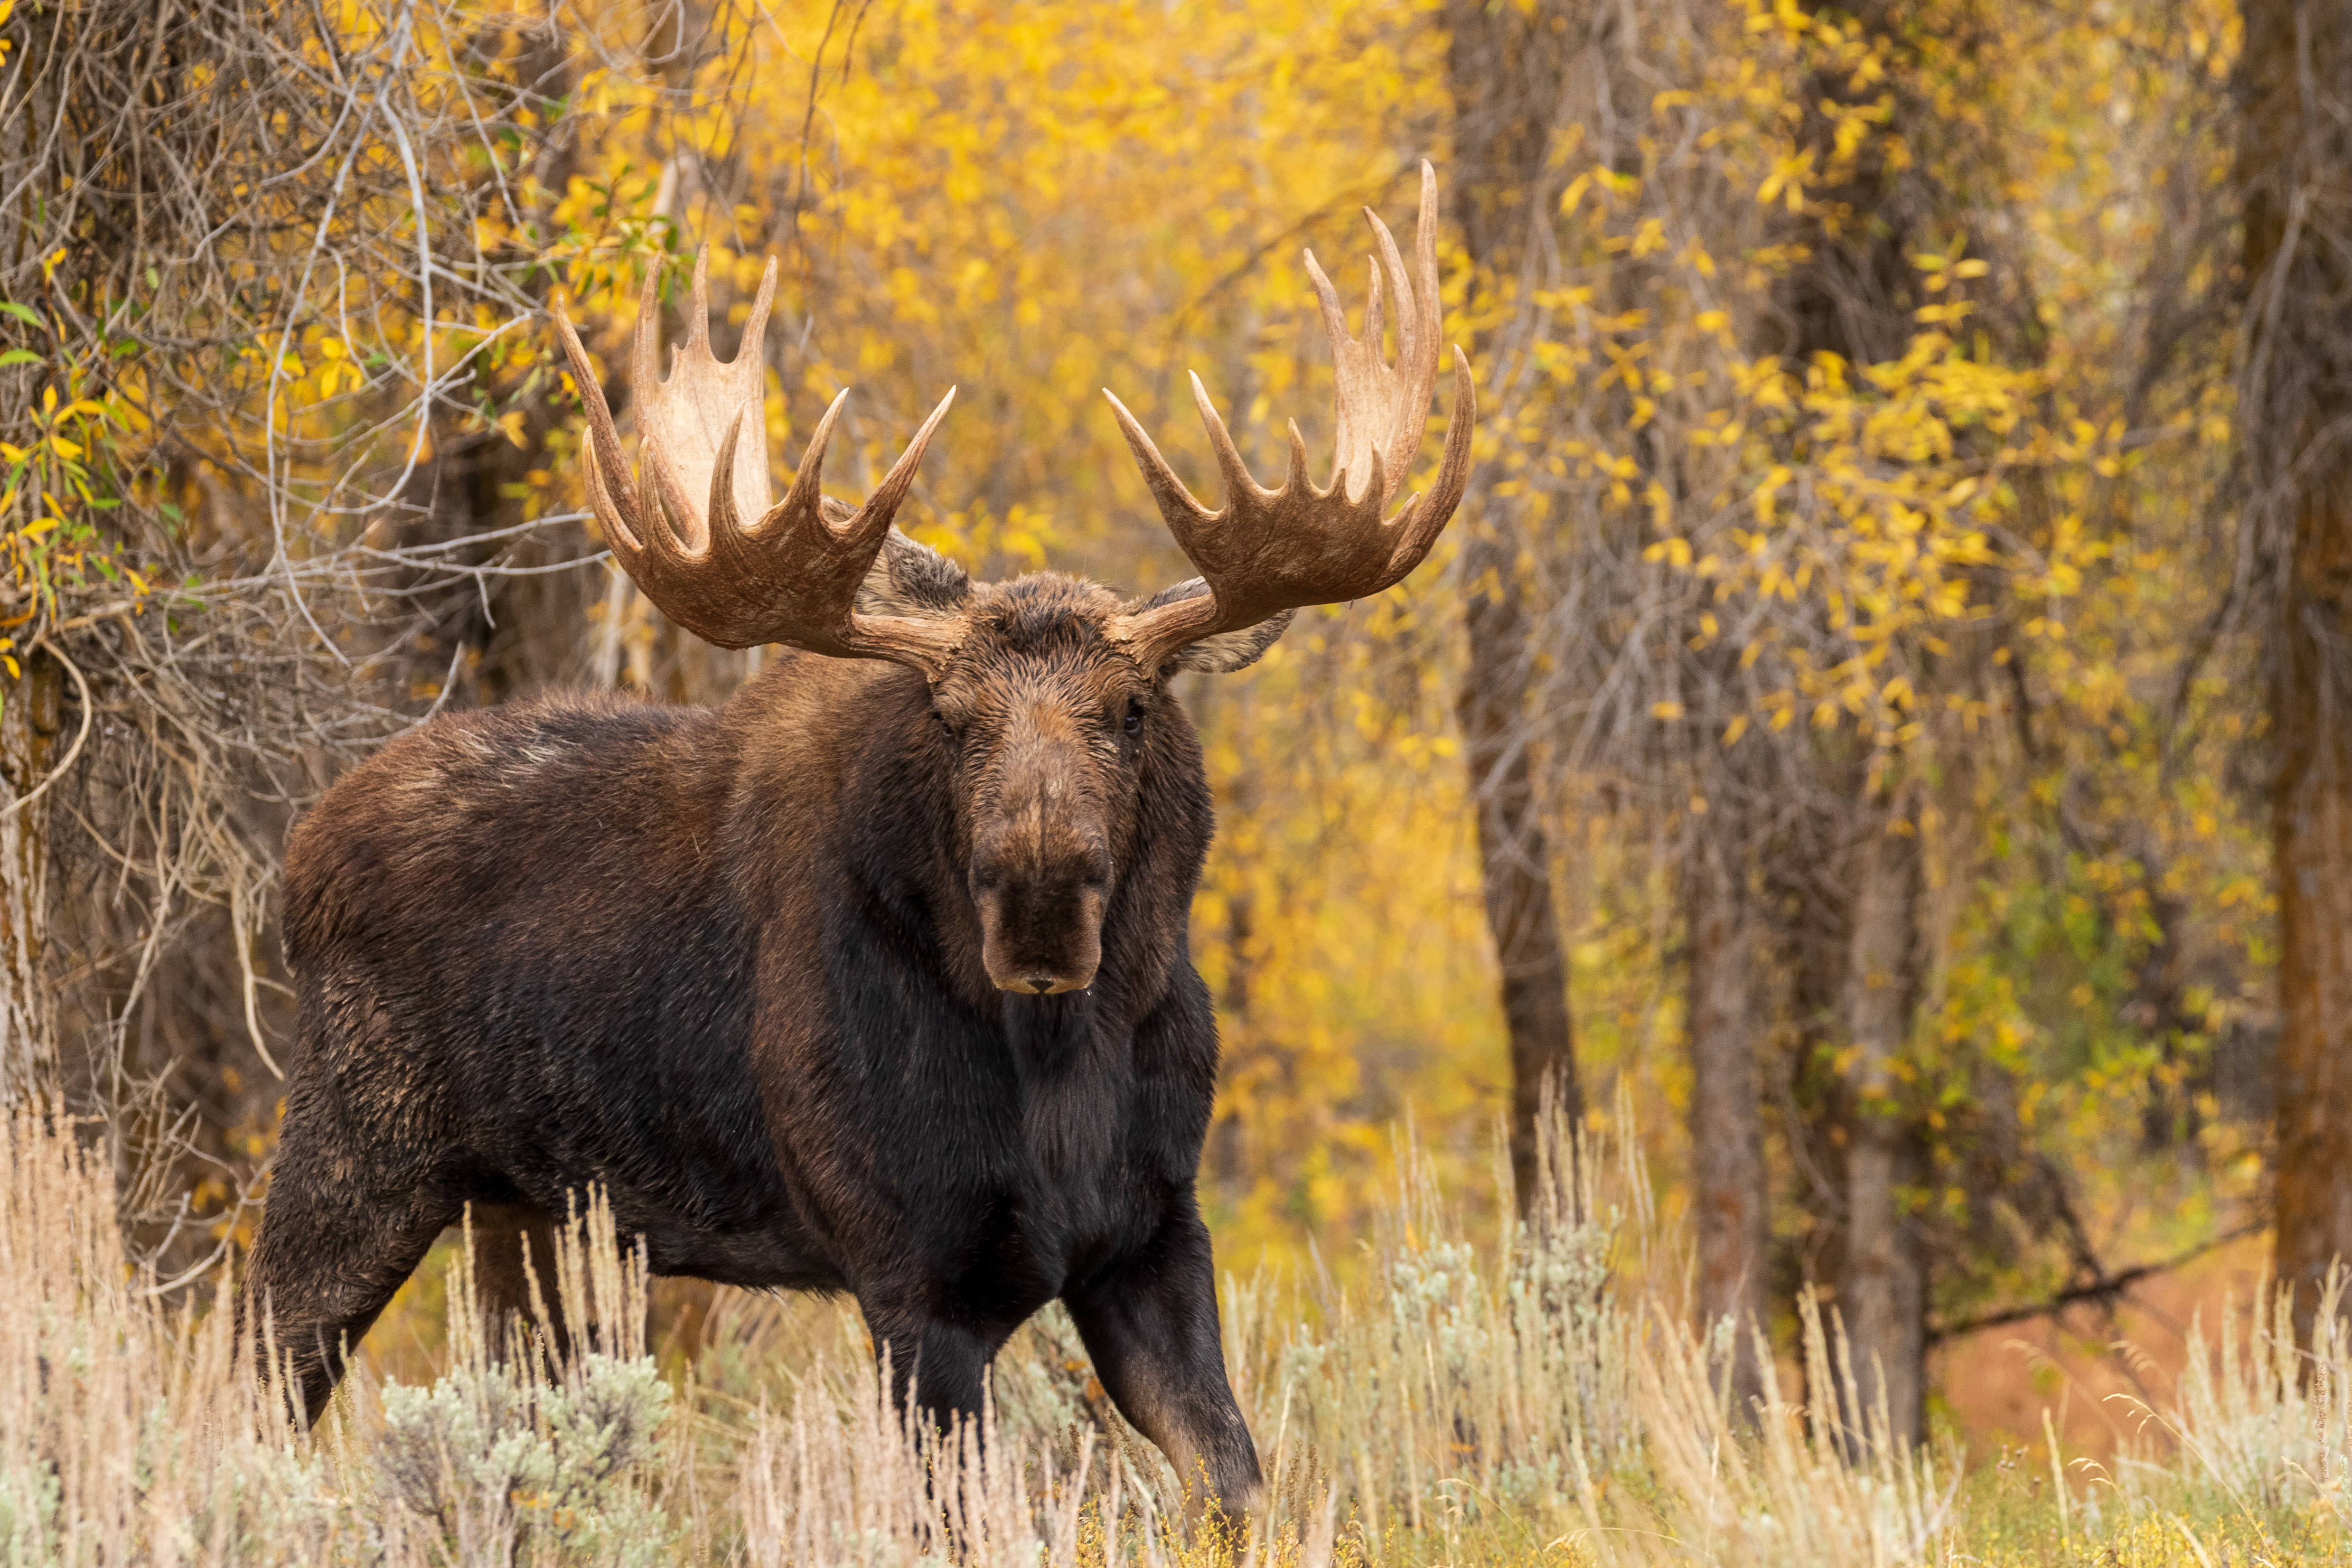 A moose in the woods, stay safe when filling moose tag with hunter education. 